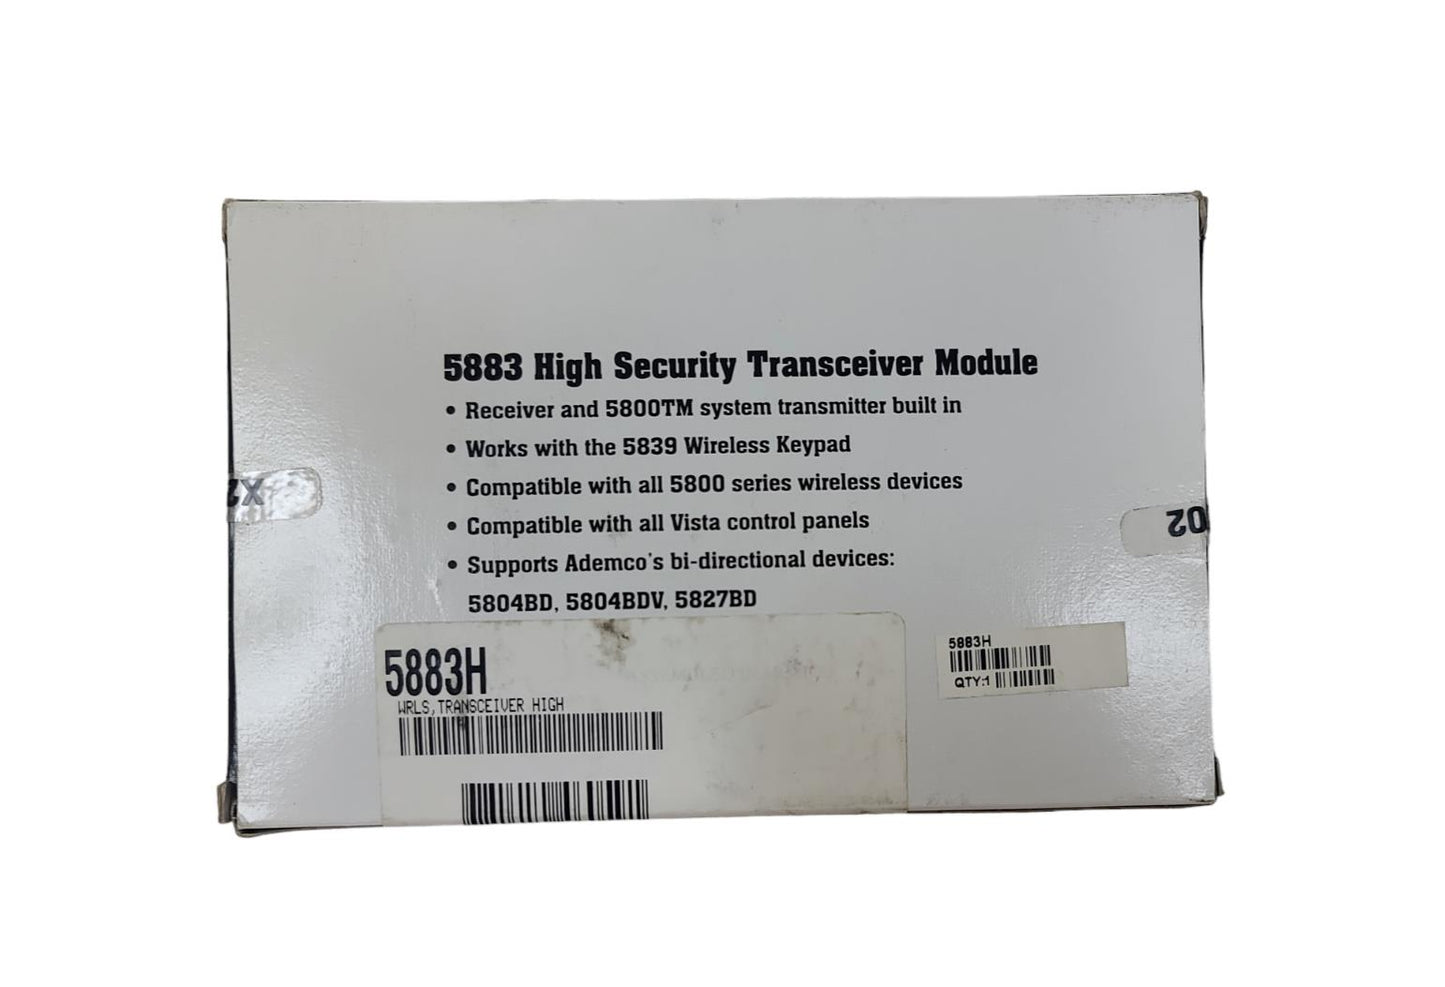 Ademco 5883 High Security Transceiver Module New